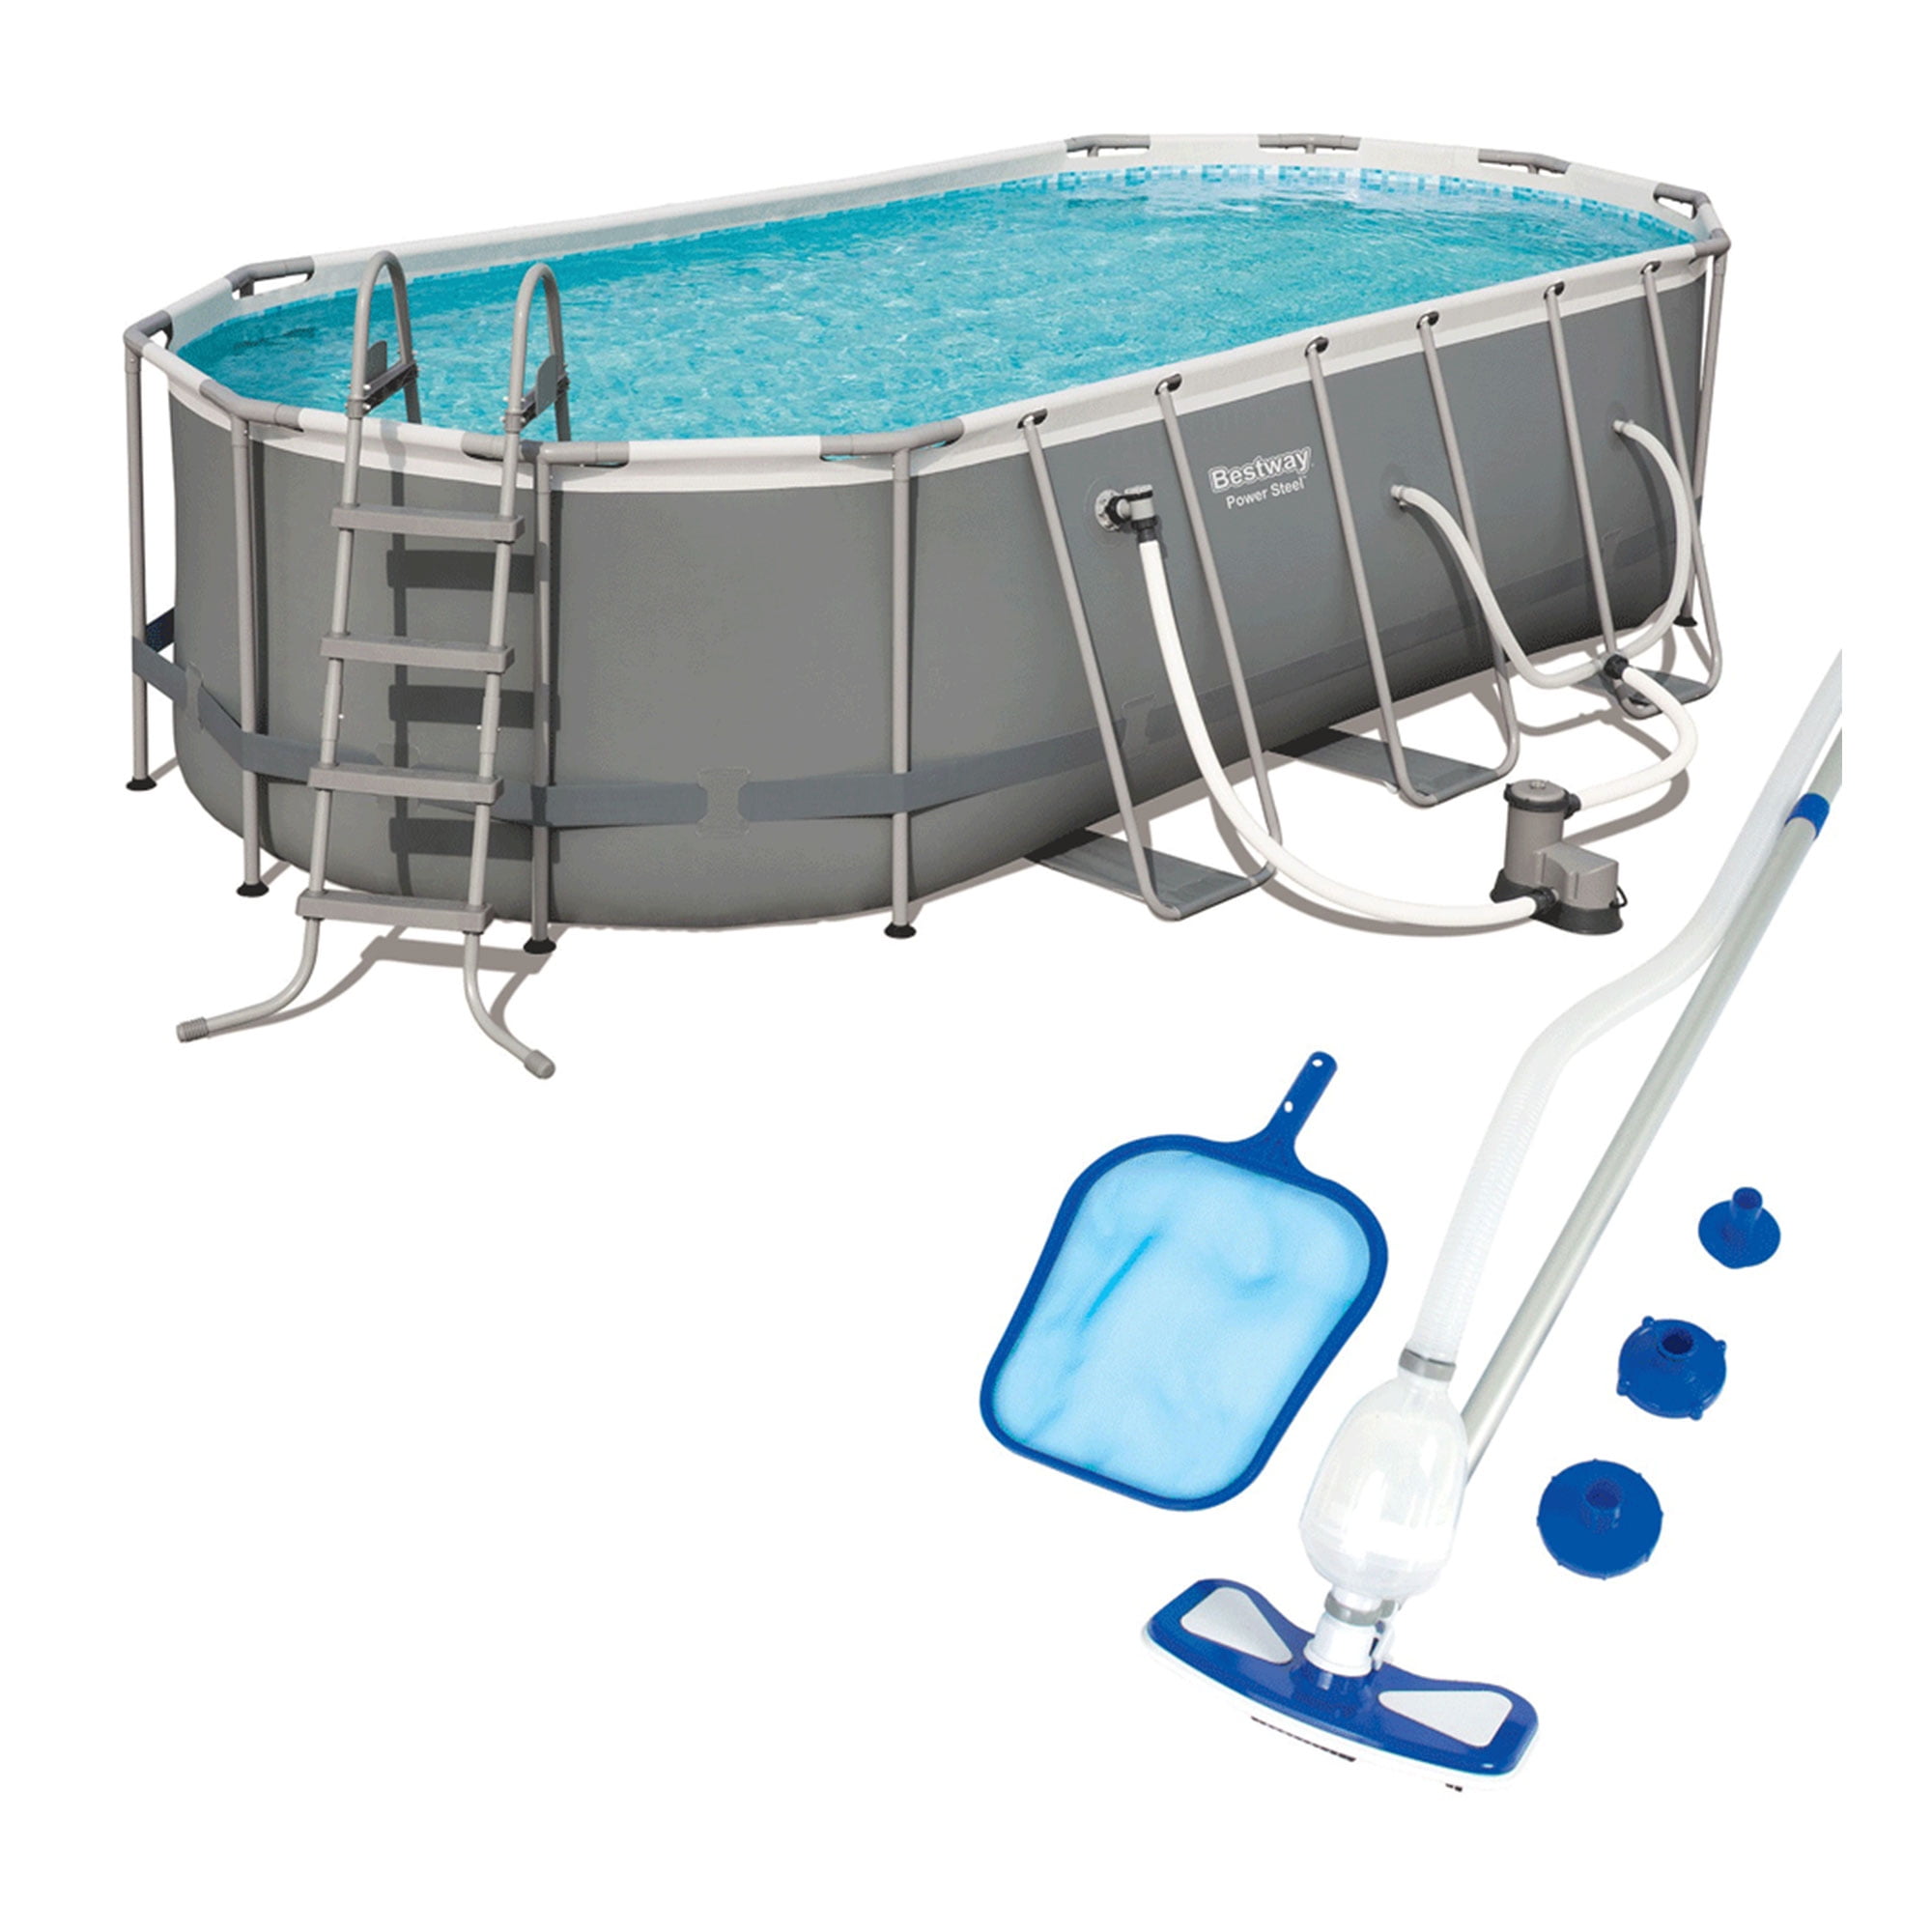 static Treaty Grudge Bestway Power 18 x 9 x 4 Ft Above Ground Pool Set w/ Pump and Cleaning Kit  - Walmart.com